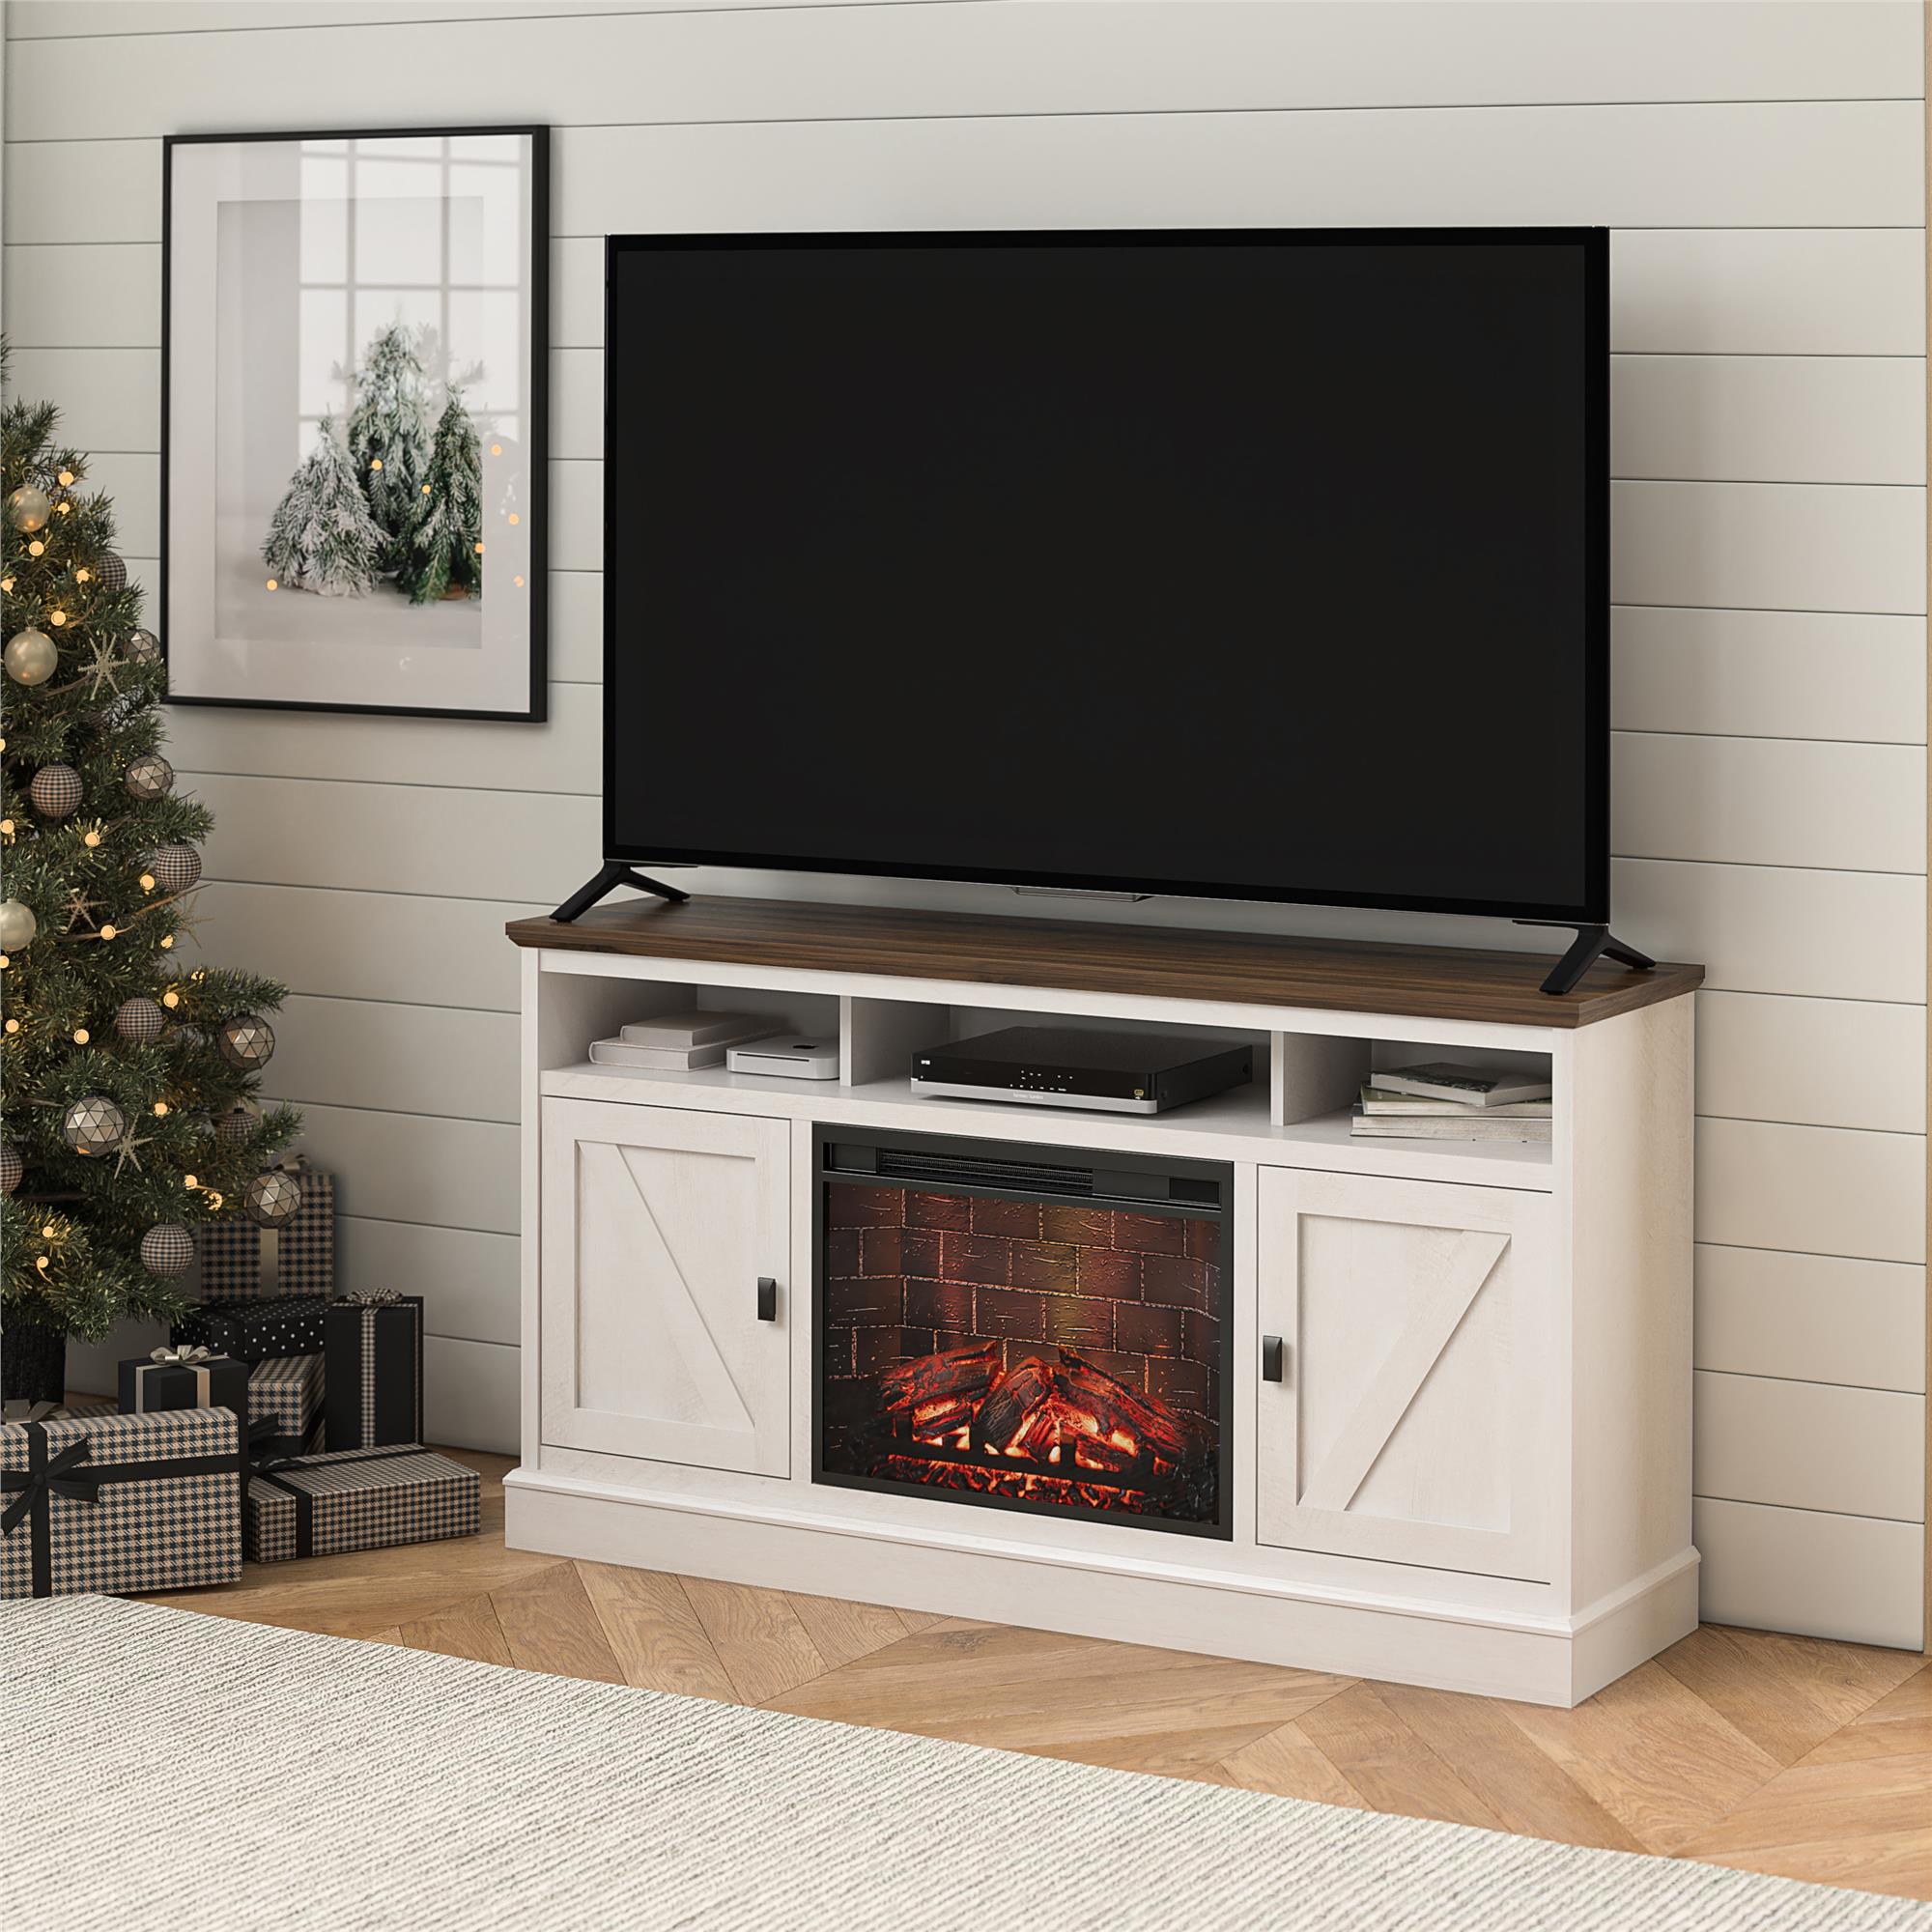 Ameriwood Home Ashton Lane Electric Fireplace TV Stand for TVs up to 65", Magnolia Oak/Columbia Walnut - image 4 of 32